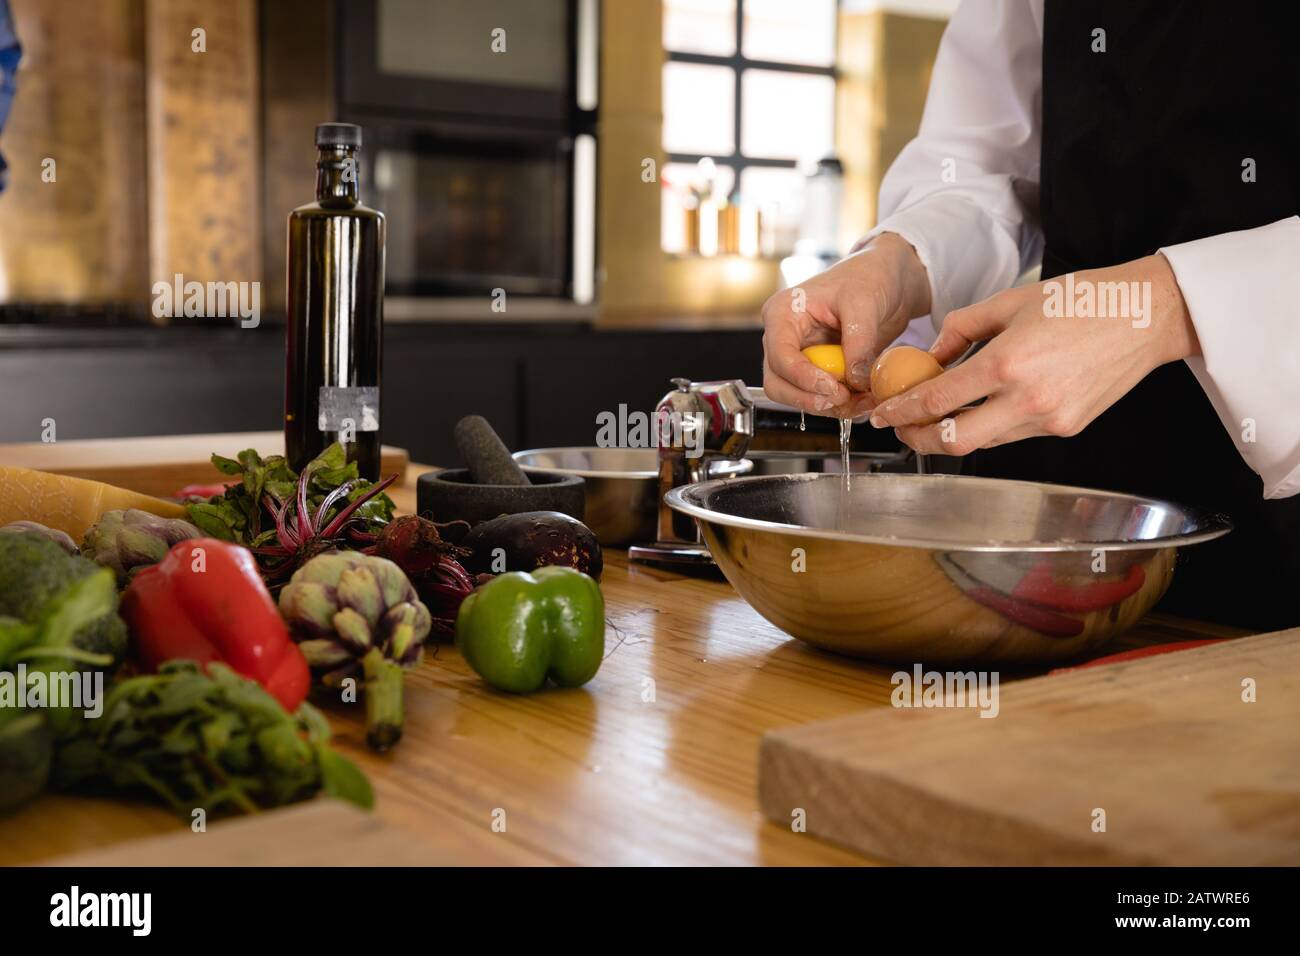 Chef putting an egg in a bowl Stock Photo